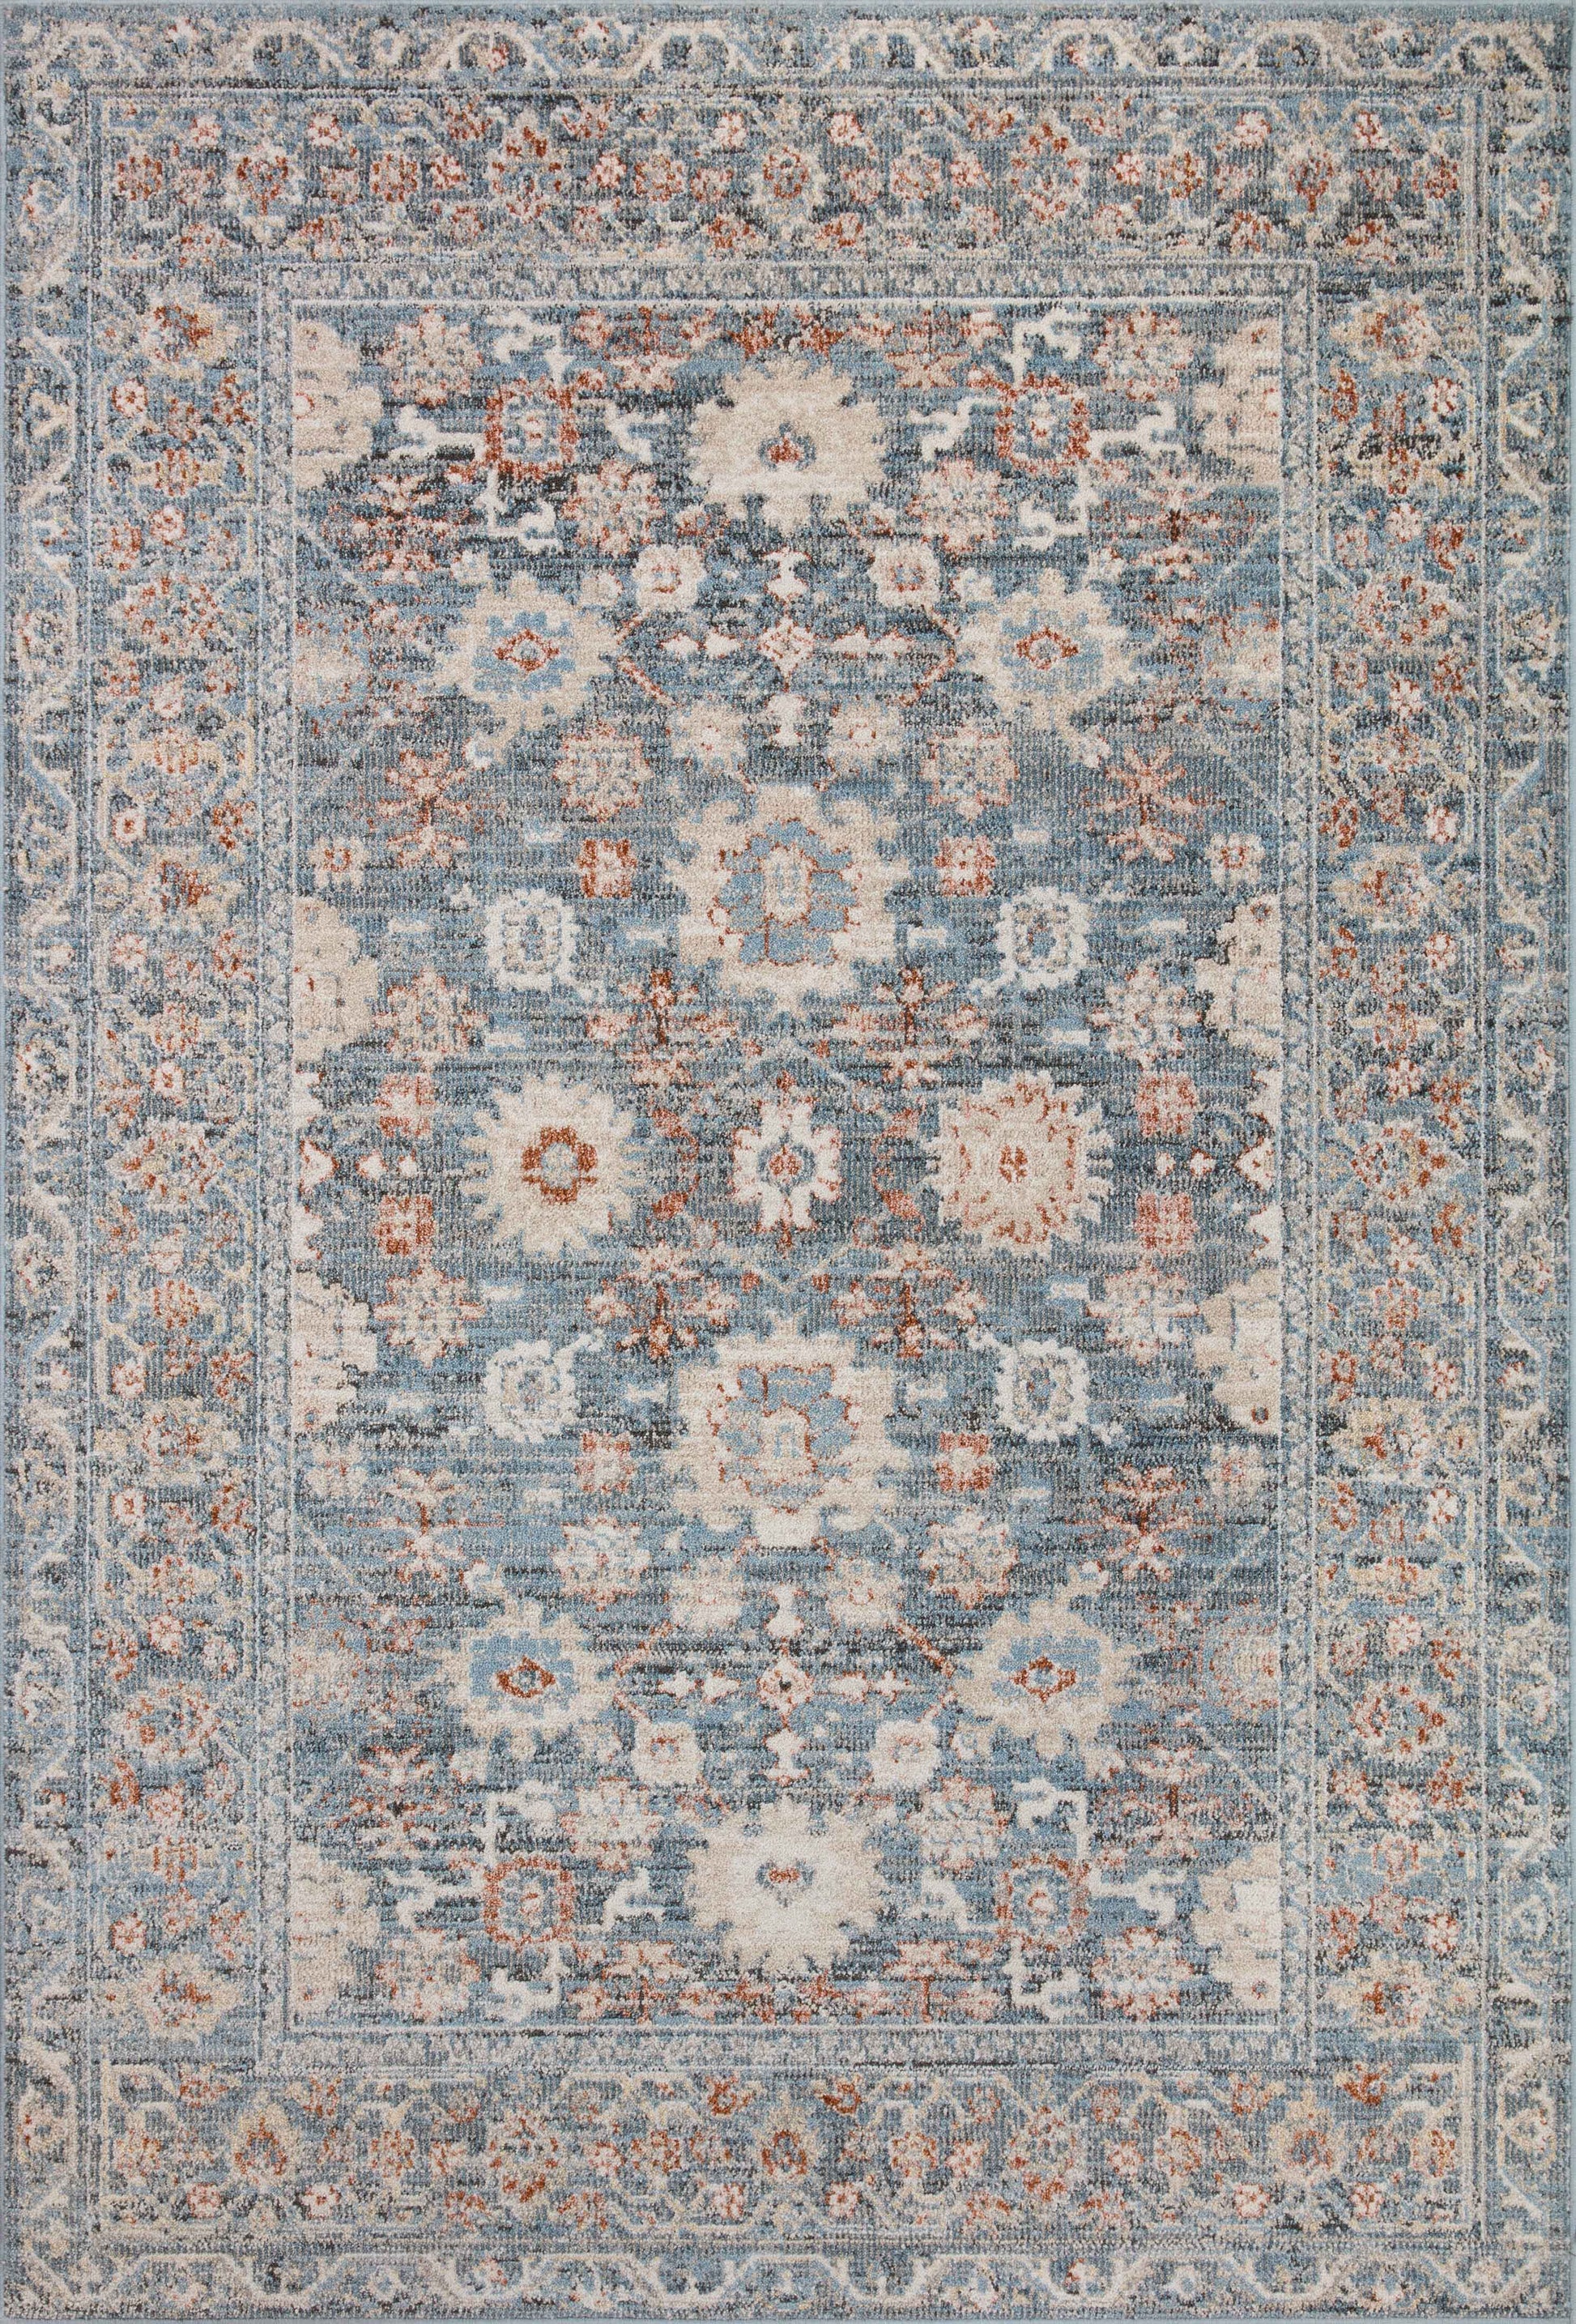 A picture of Loloi's Odette rug, in style ODT-07, color Sky / Rust